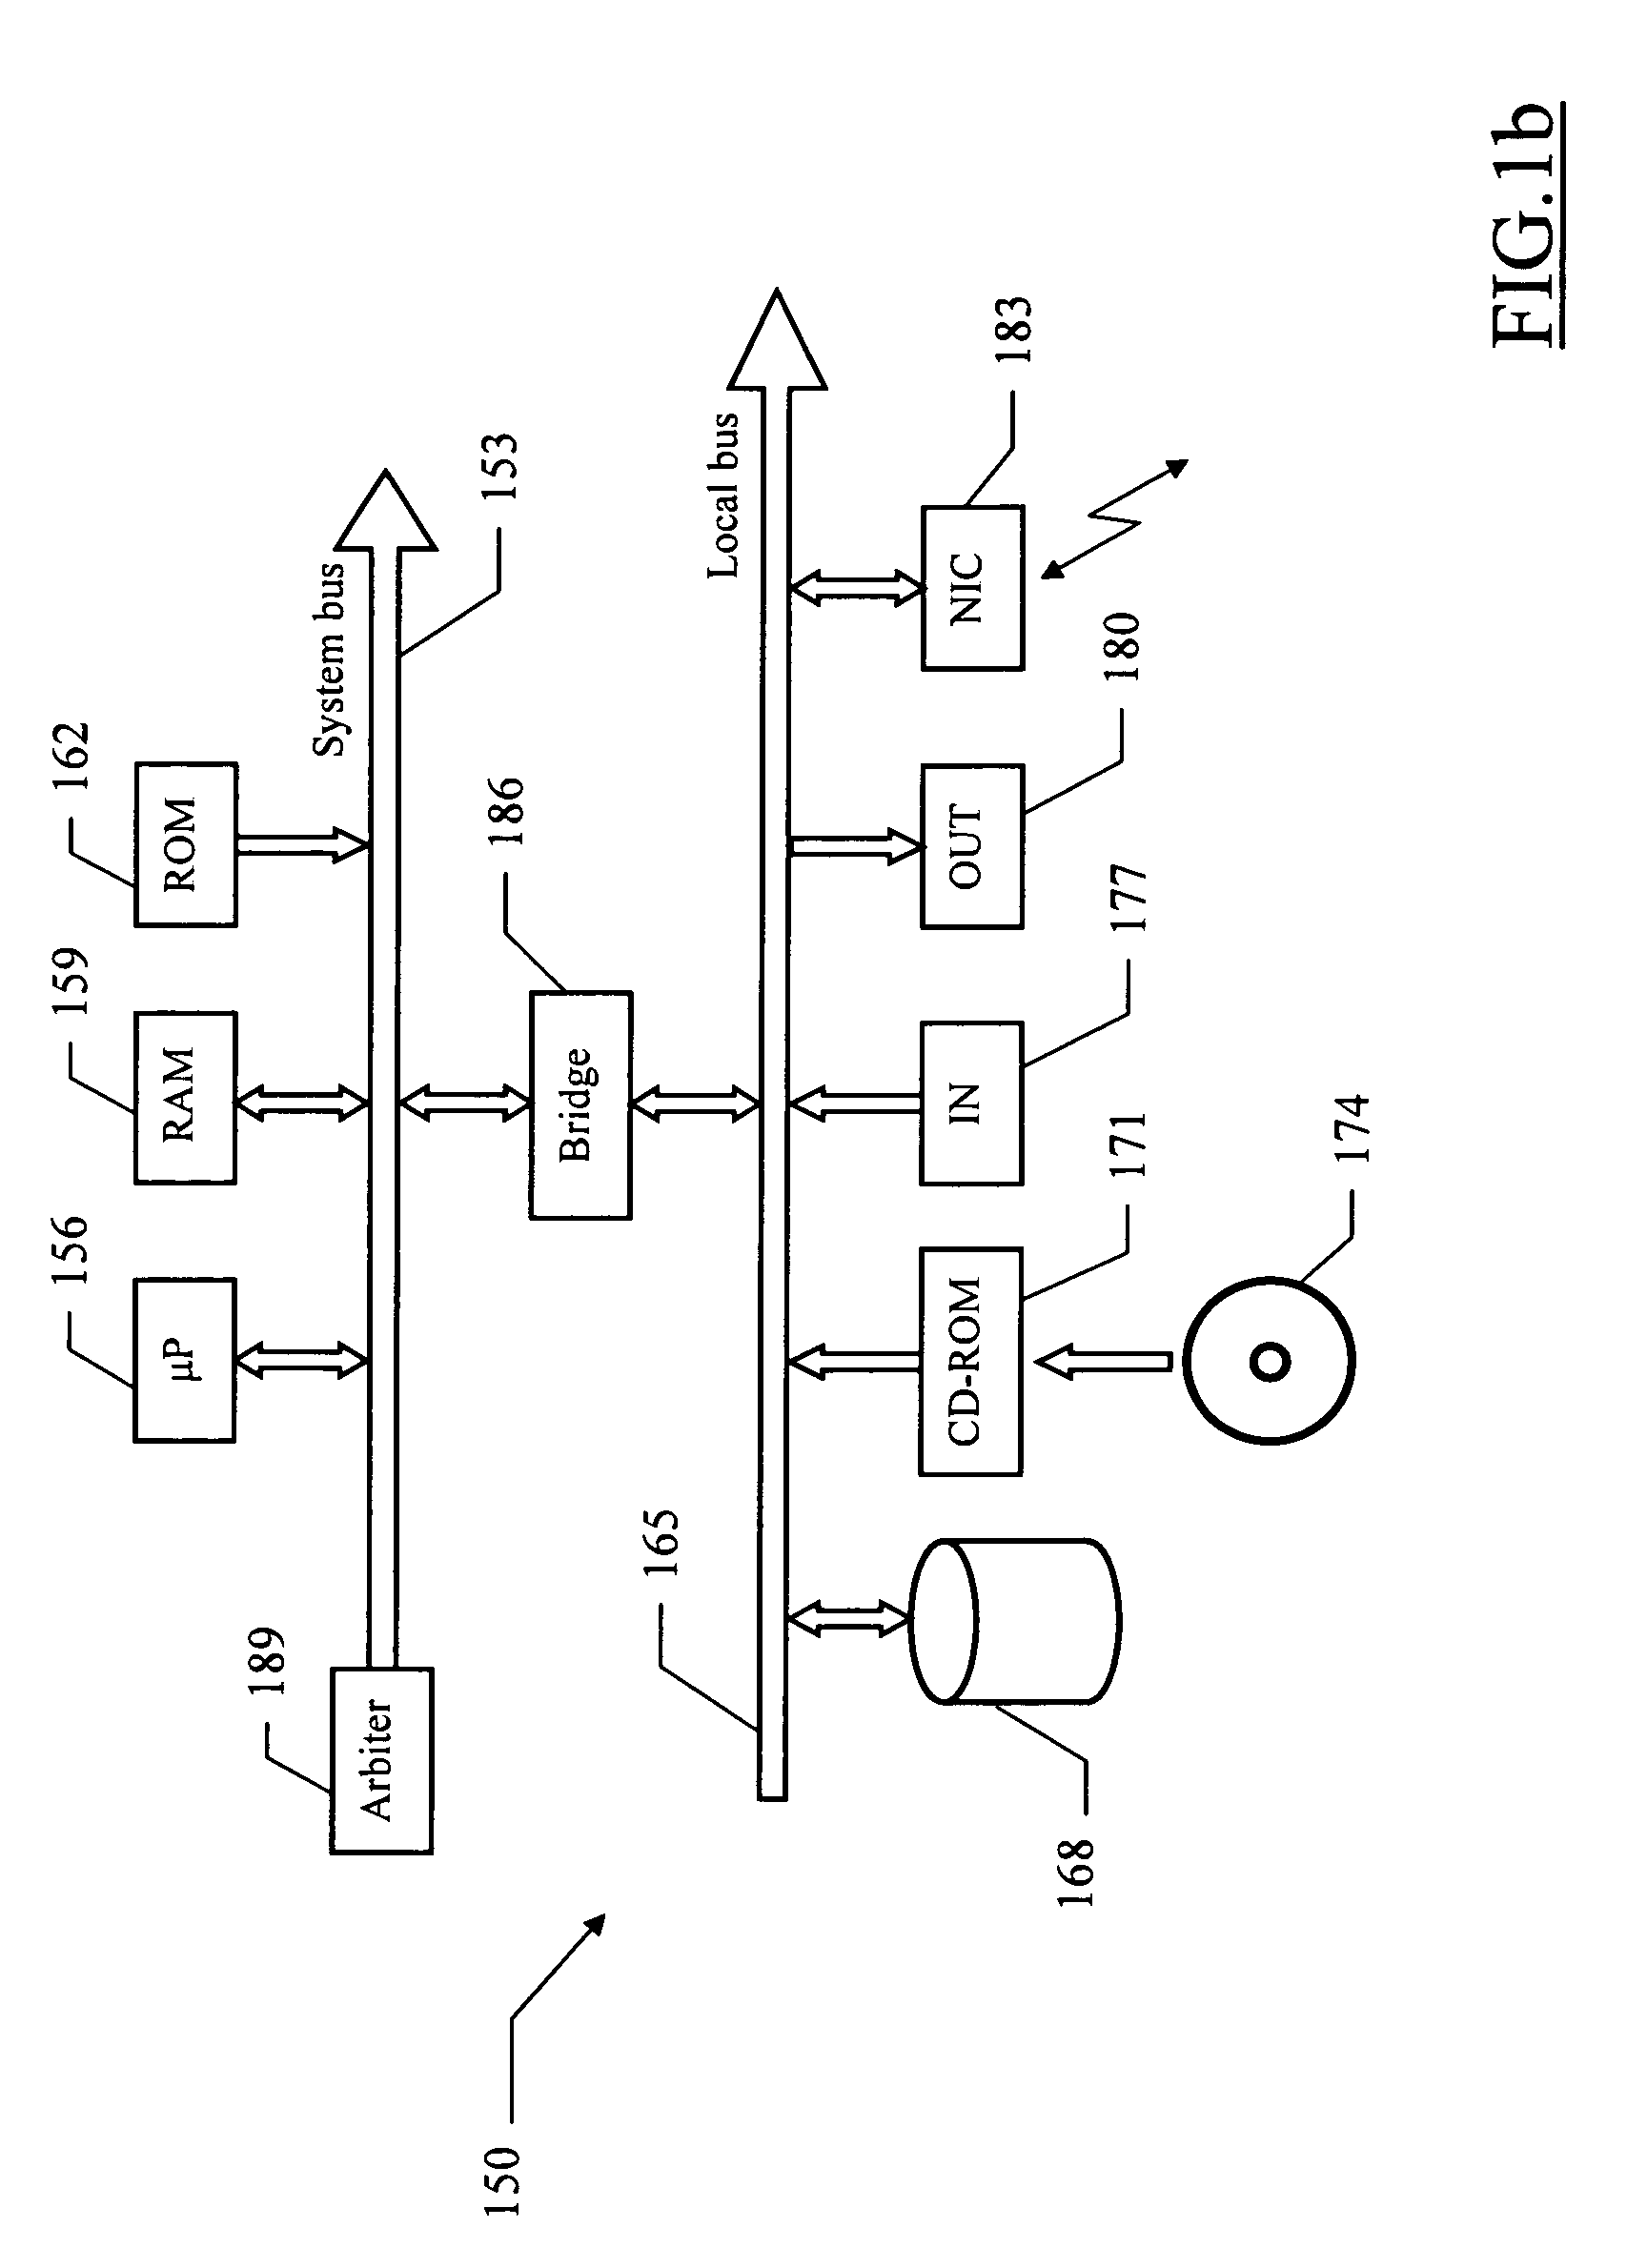 Method for monitoring data processing system availability